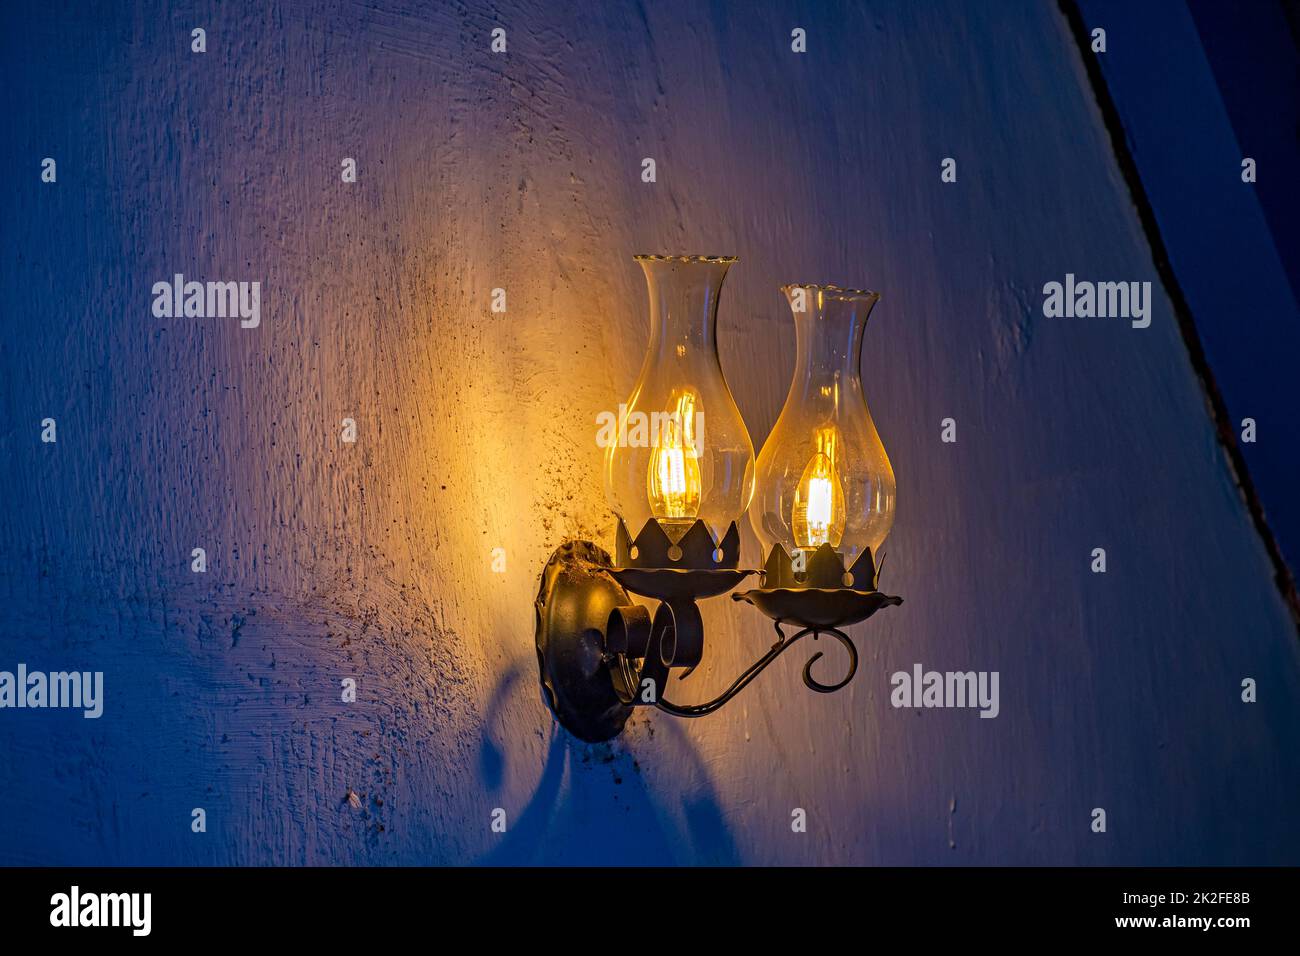 Old lamp adapted for electric light Stock Photo